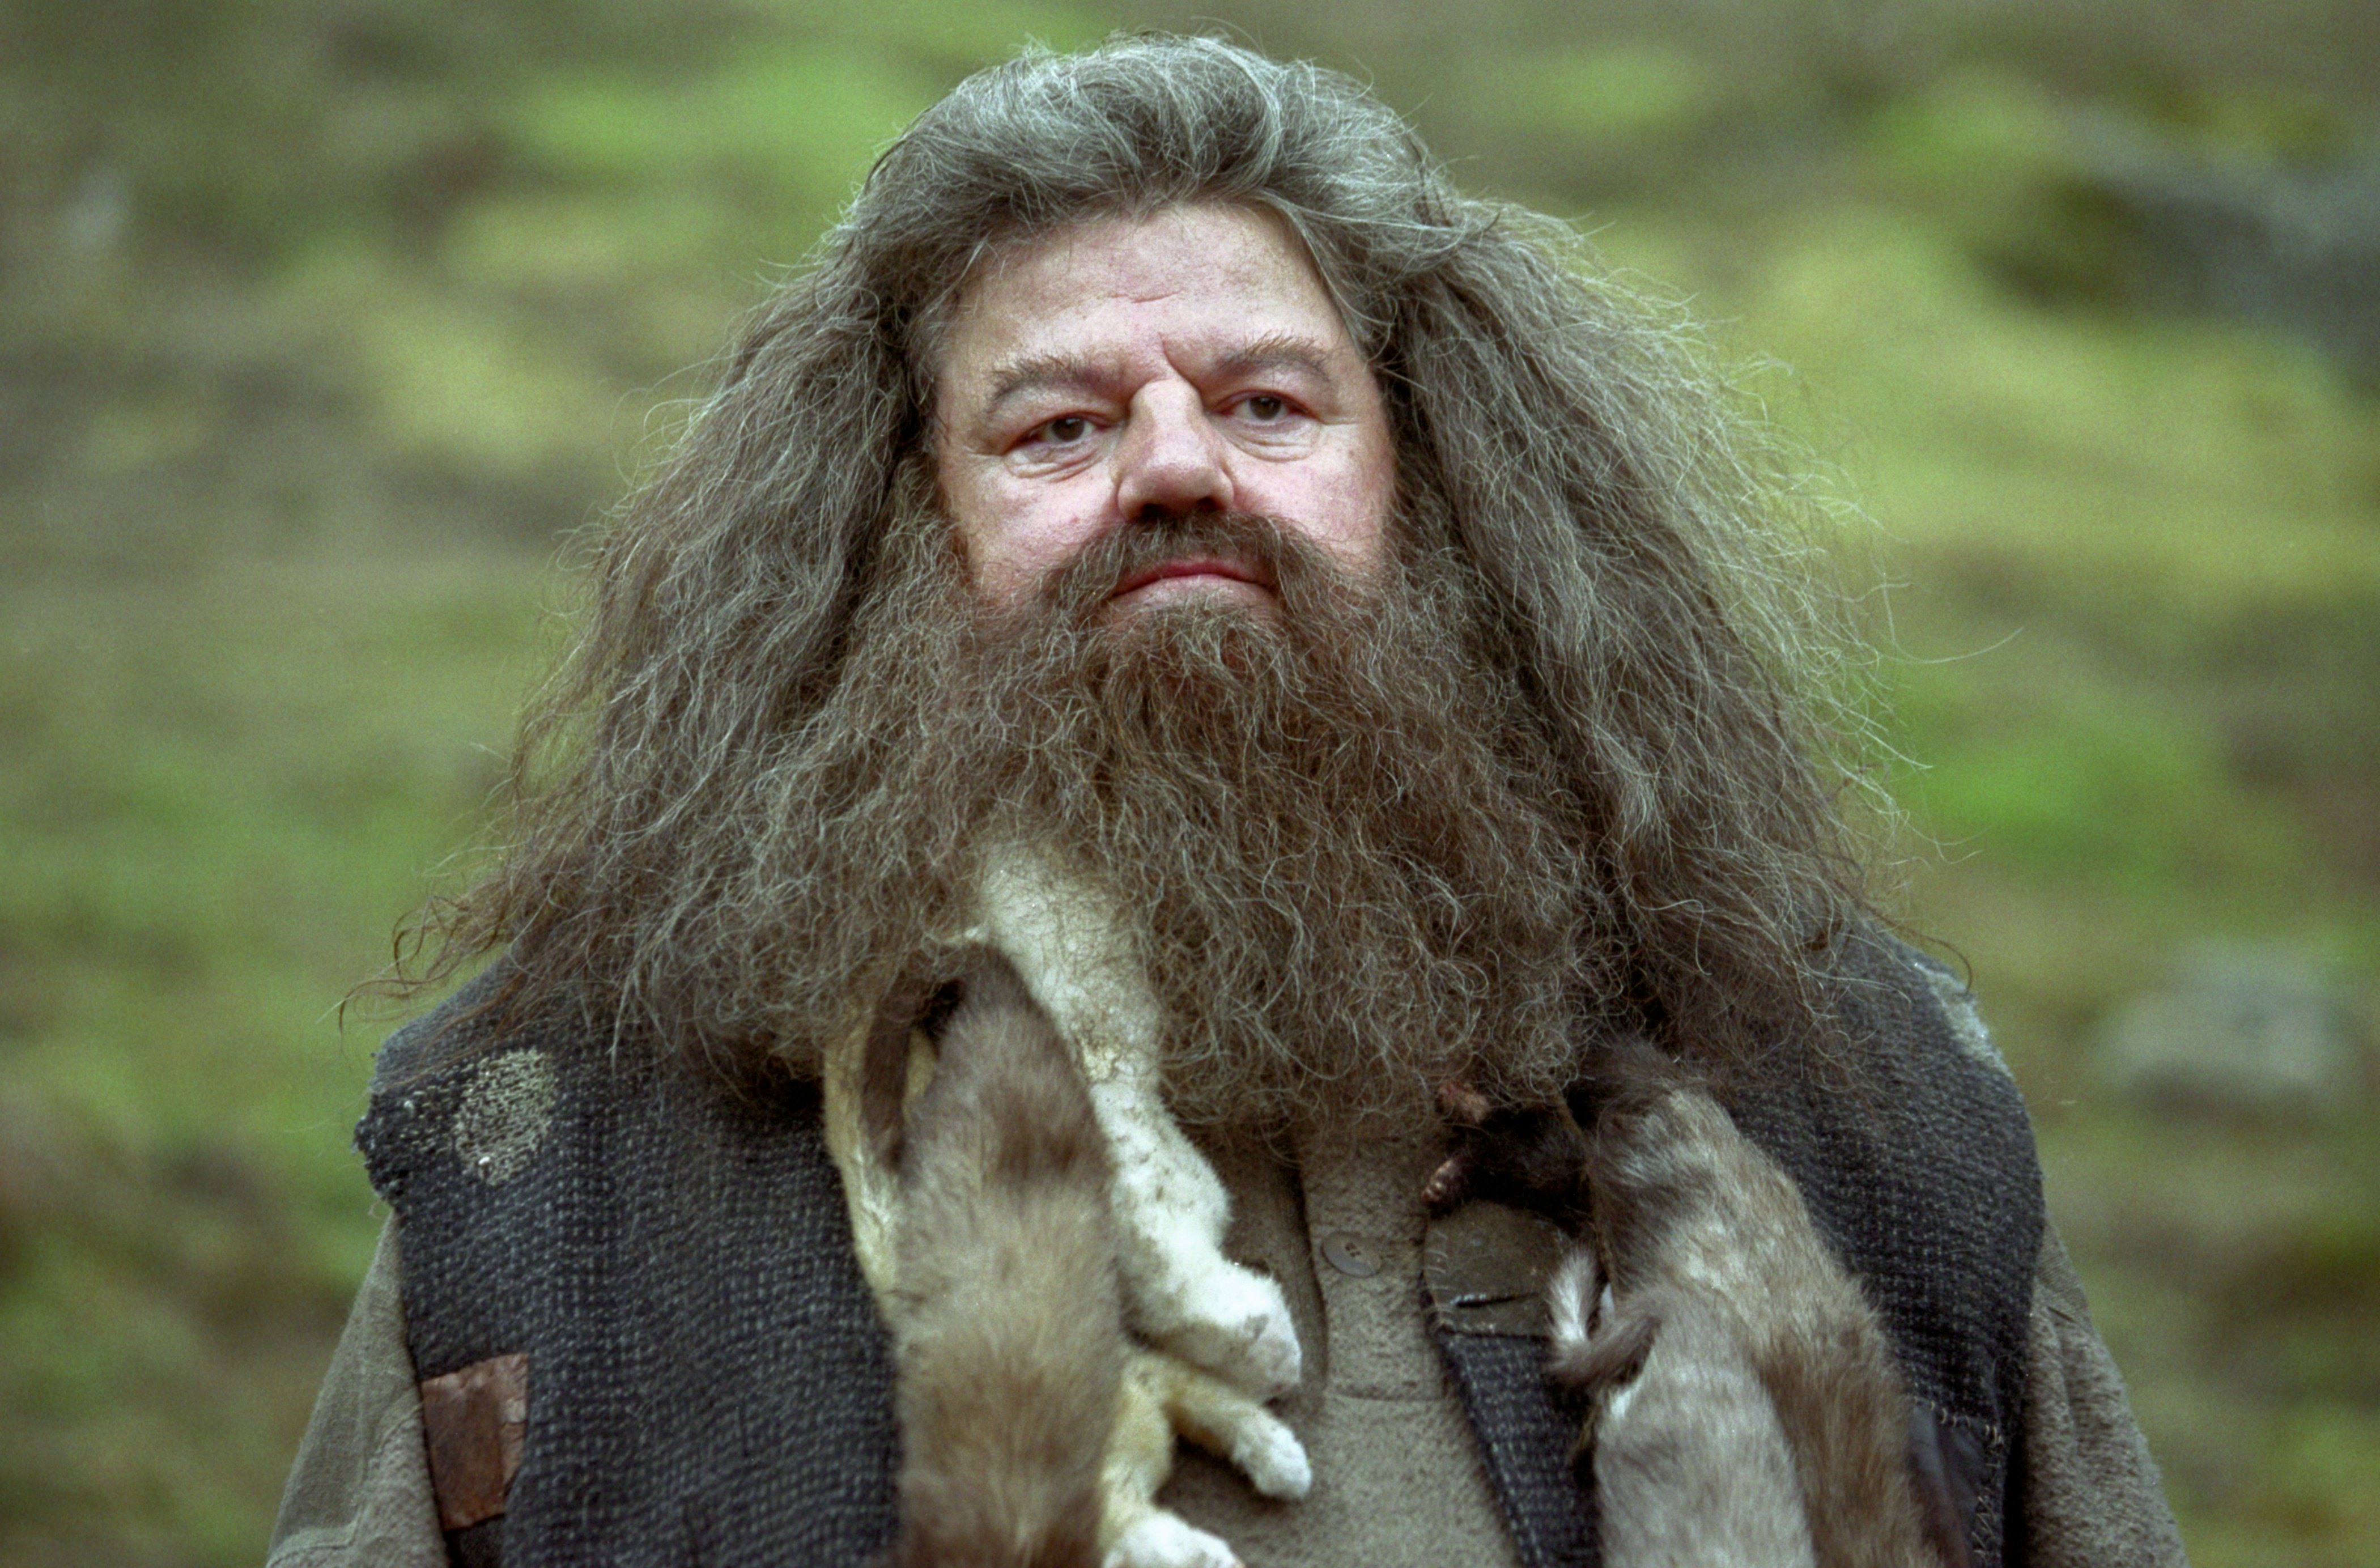 hagrid actor in real life